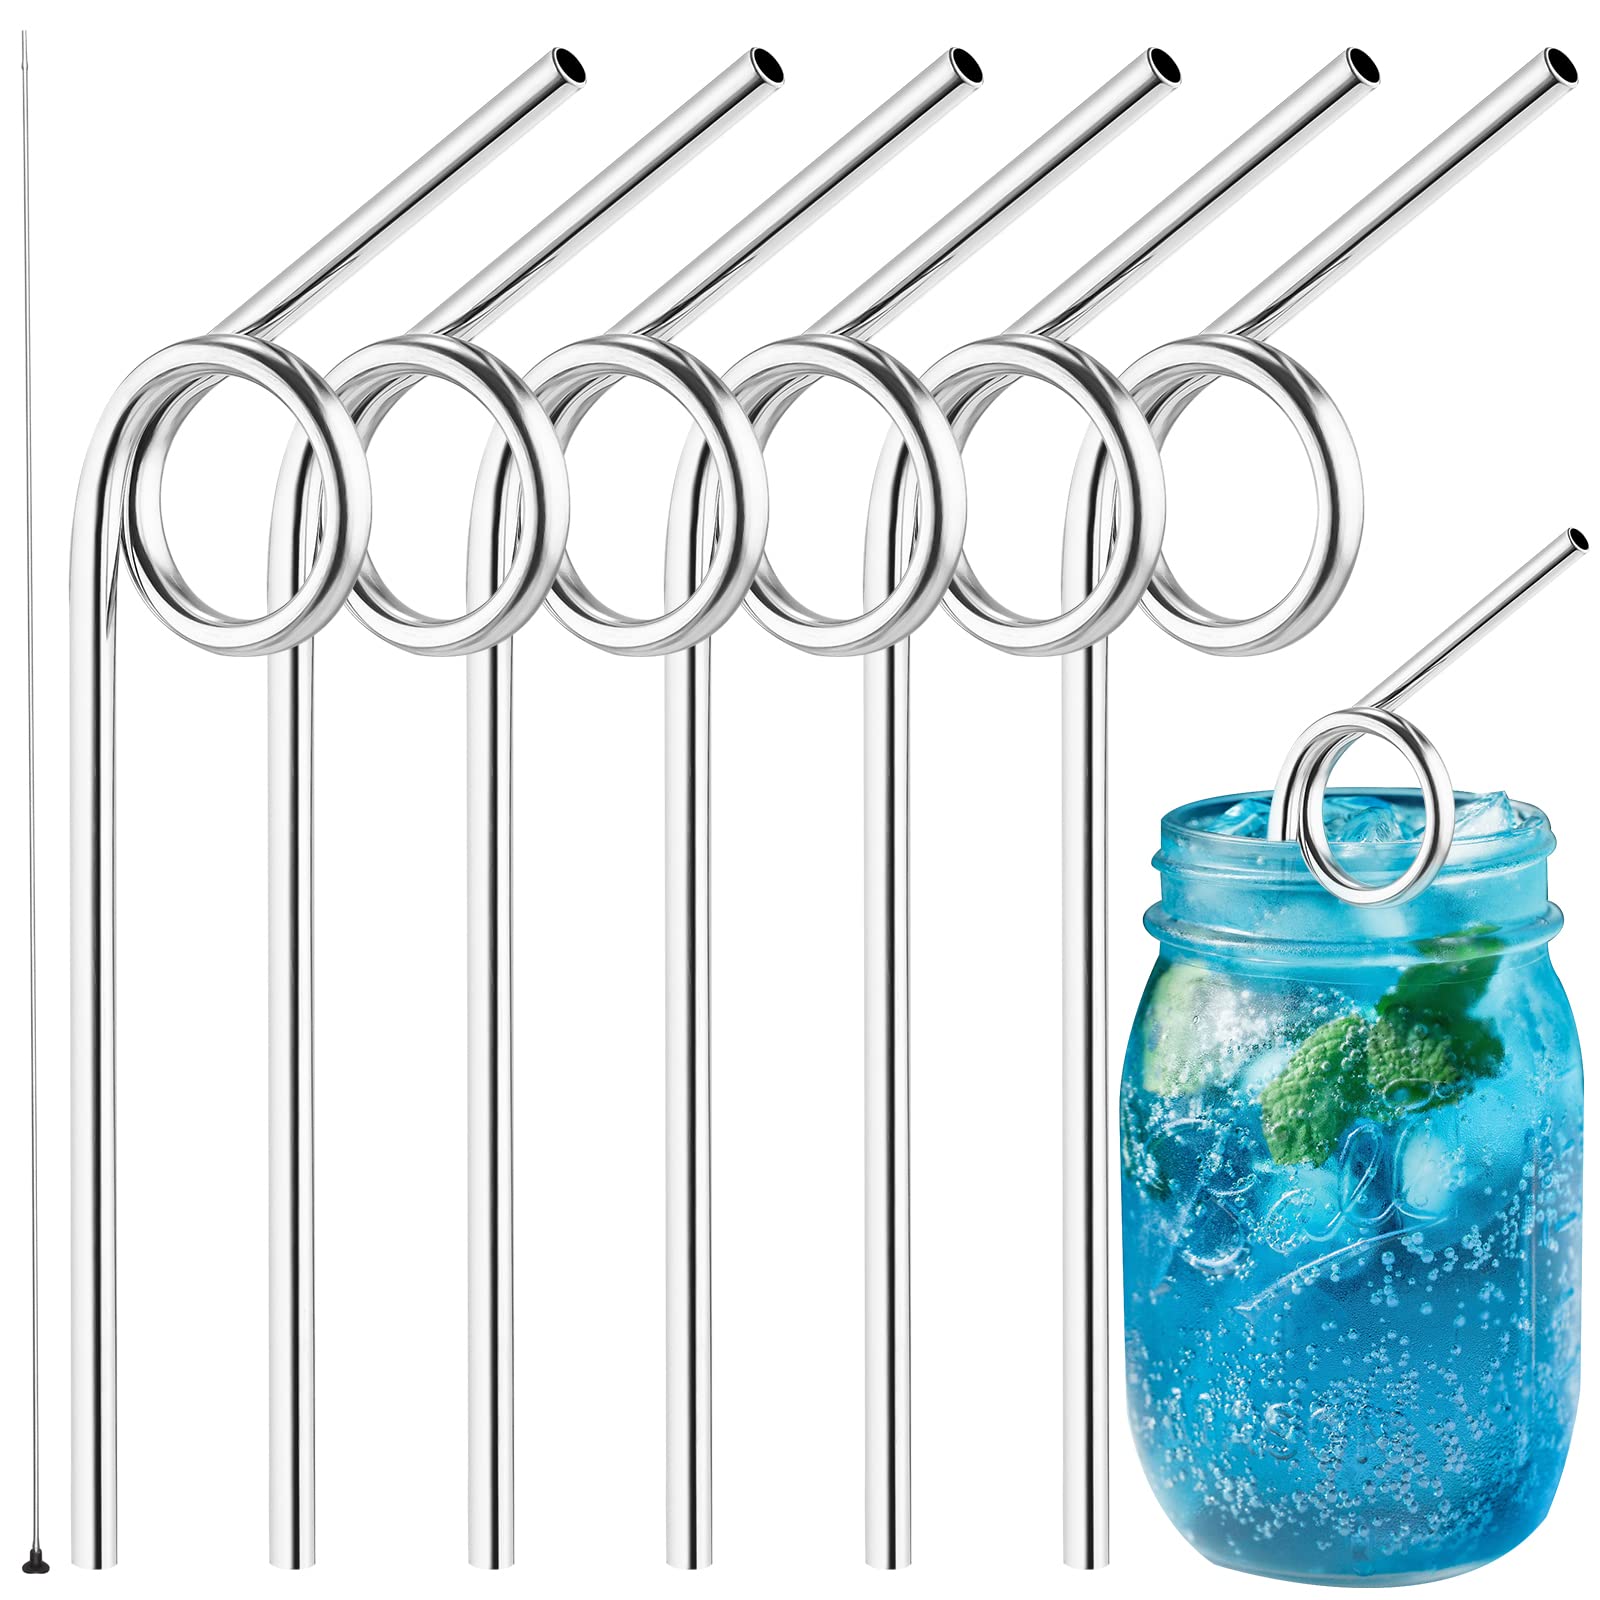 Loop Design Reusable Stainless Steel Straws, Tomorotec Home Metal Straw Sets with Cleaning Brushes for Tumblers Beverage Drinks Cocktail (Silver)